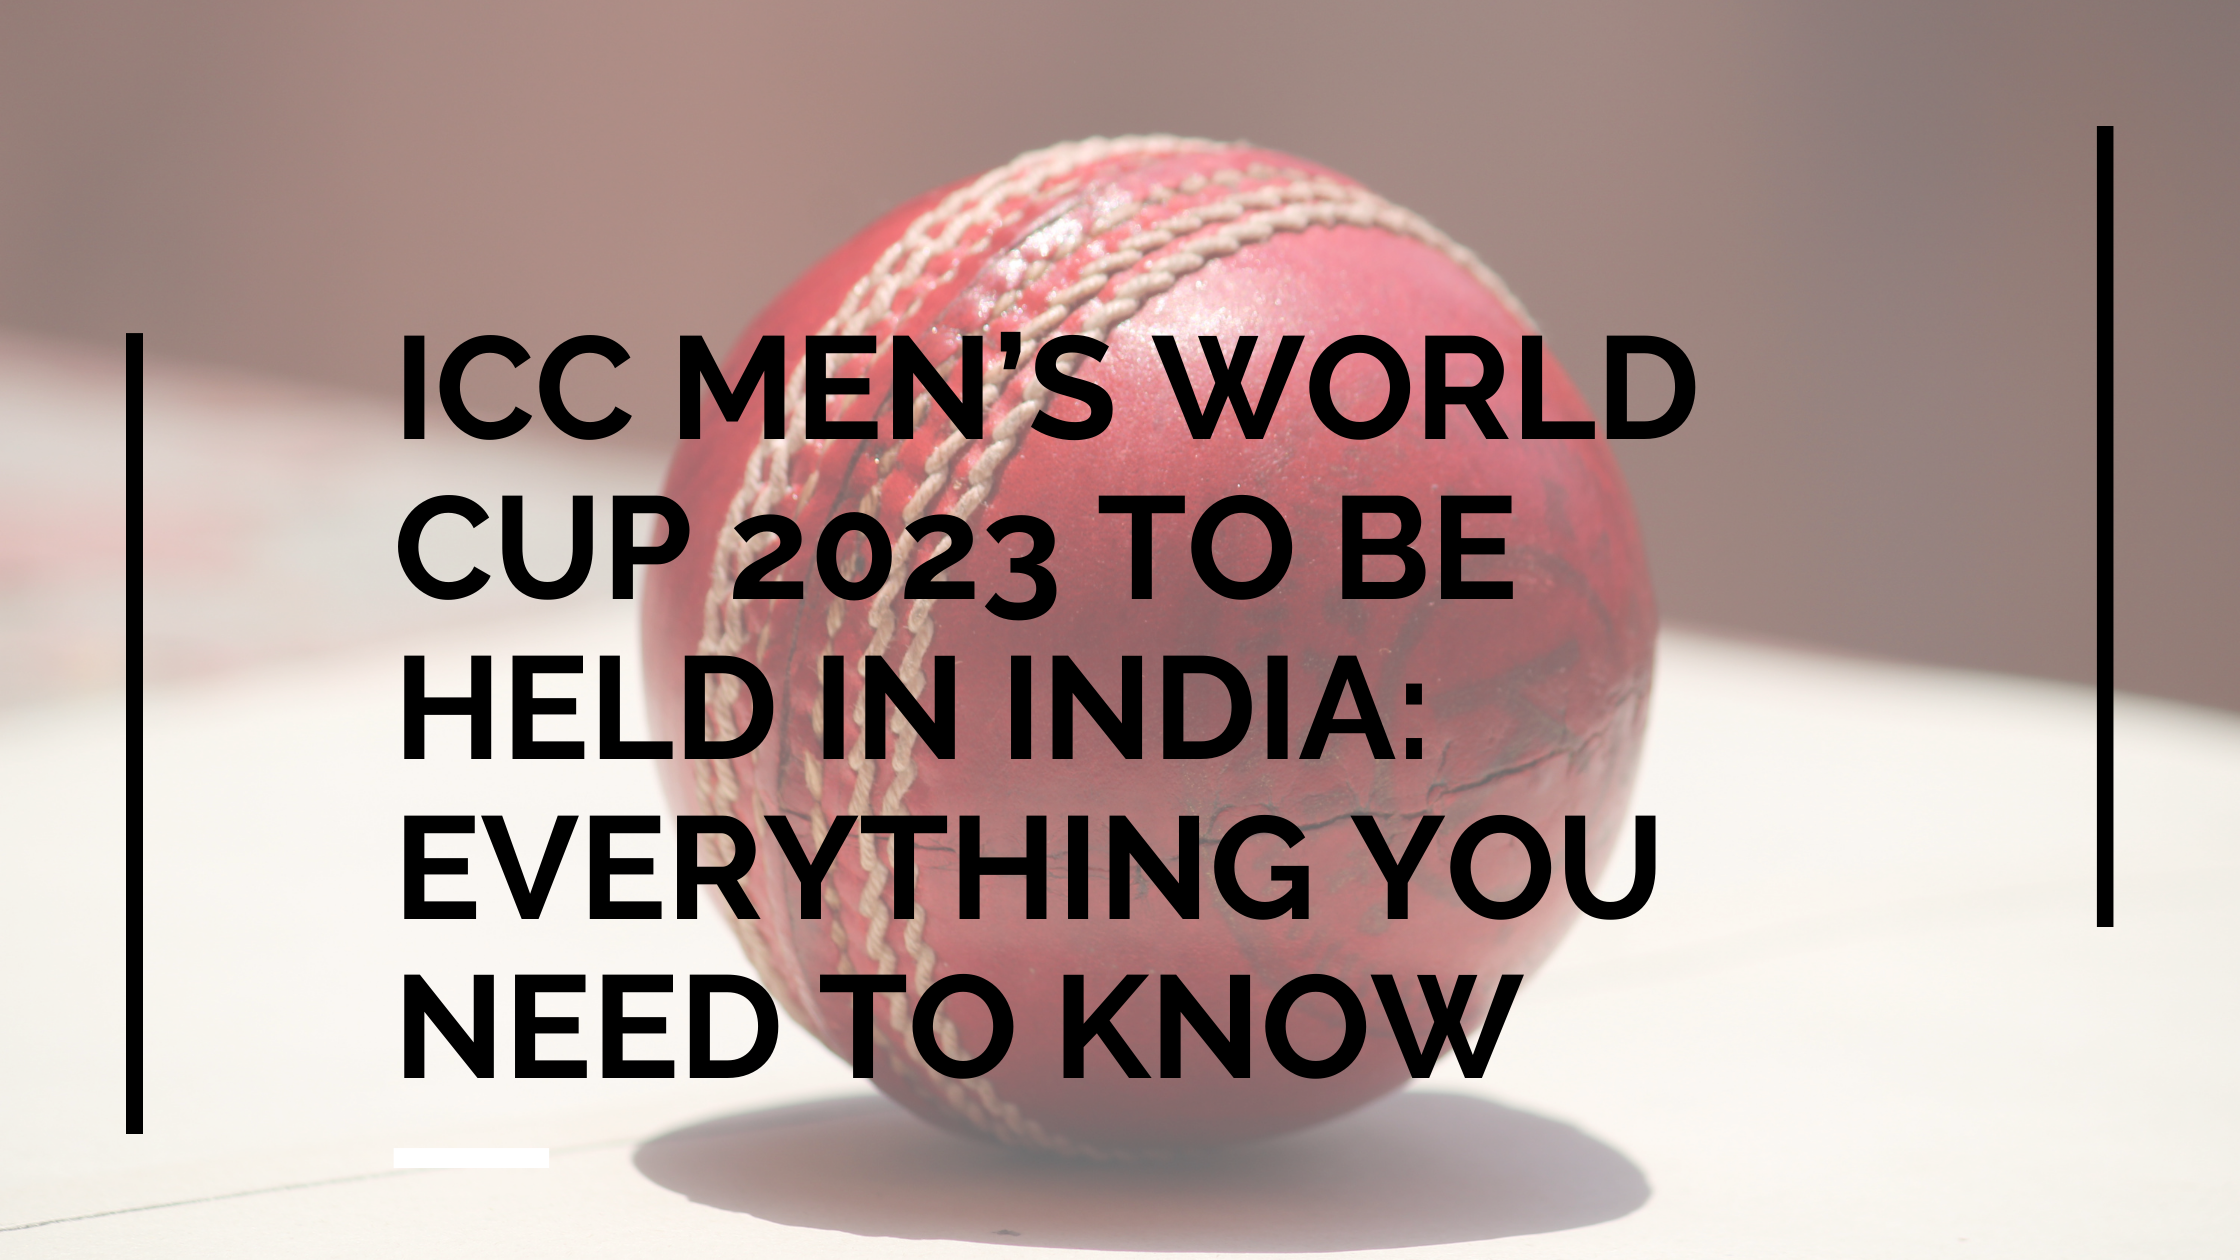 Do you know? ICC Men’s World Cup 2023 to be held in India